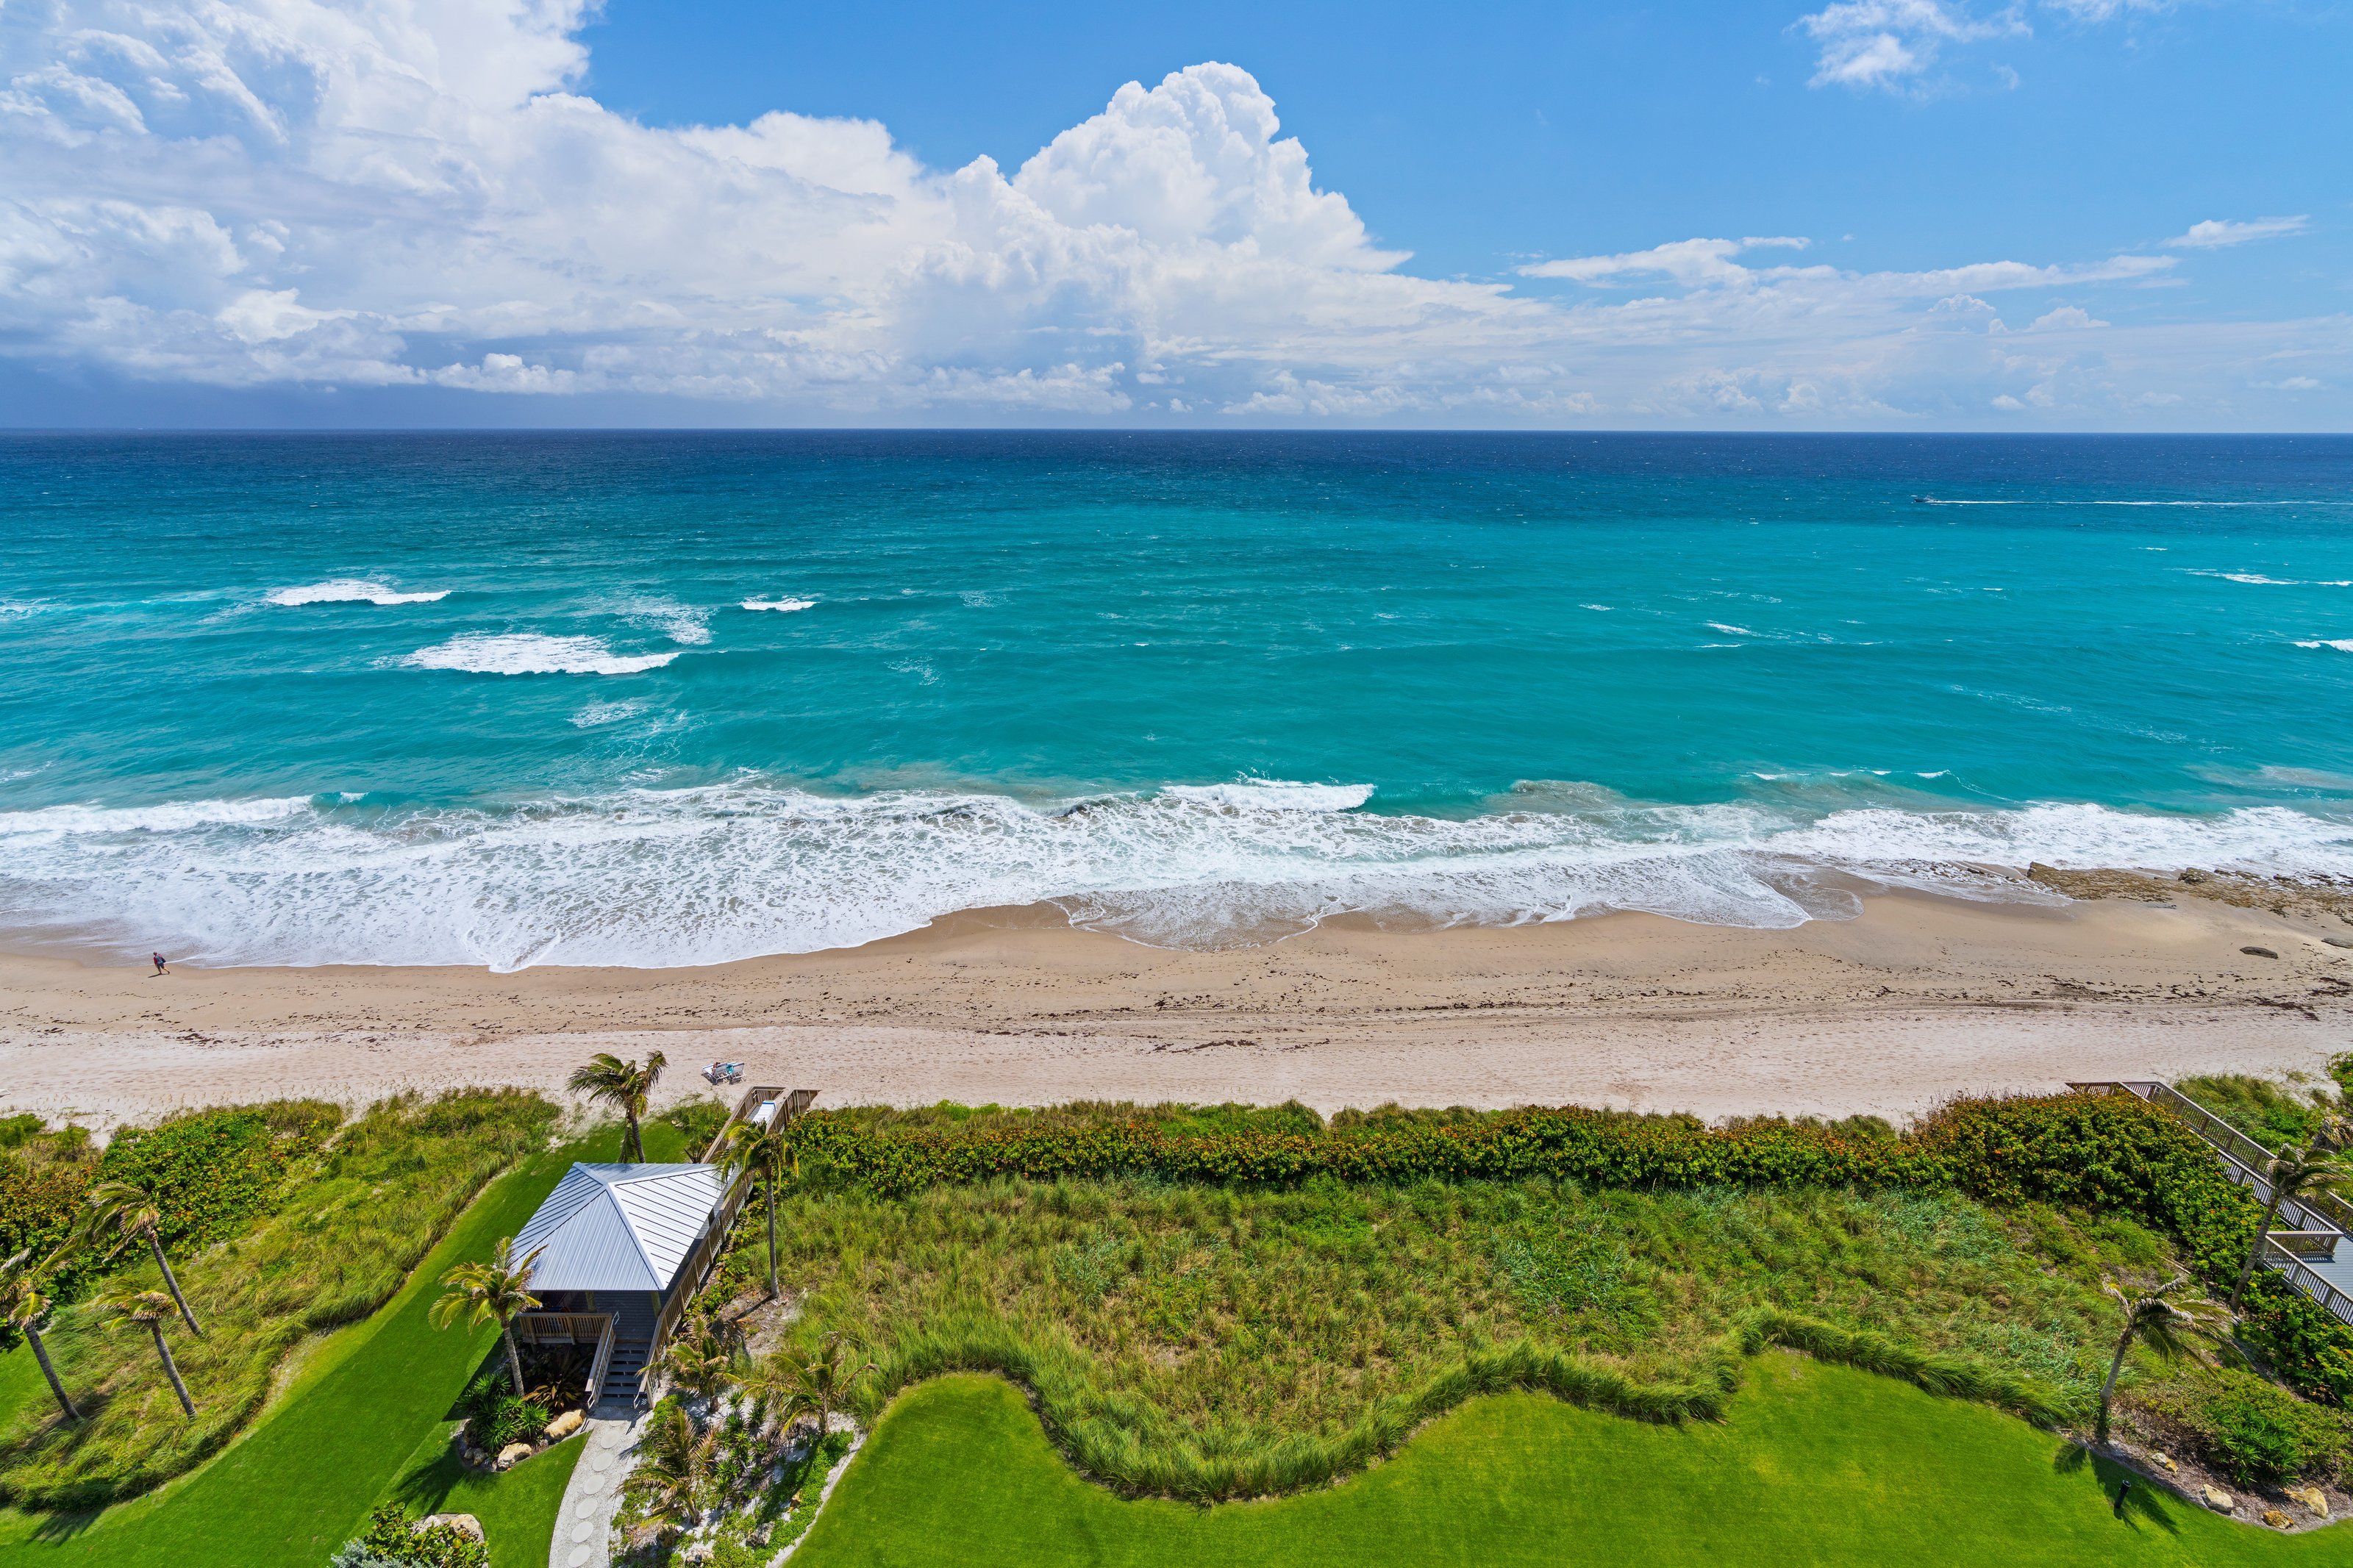 Compass Palm Beach Featured Listings